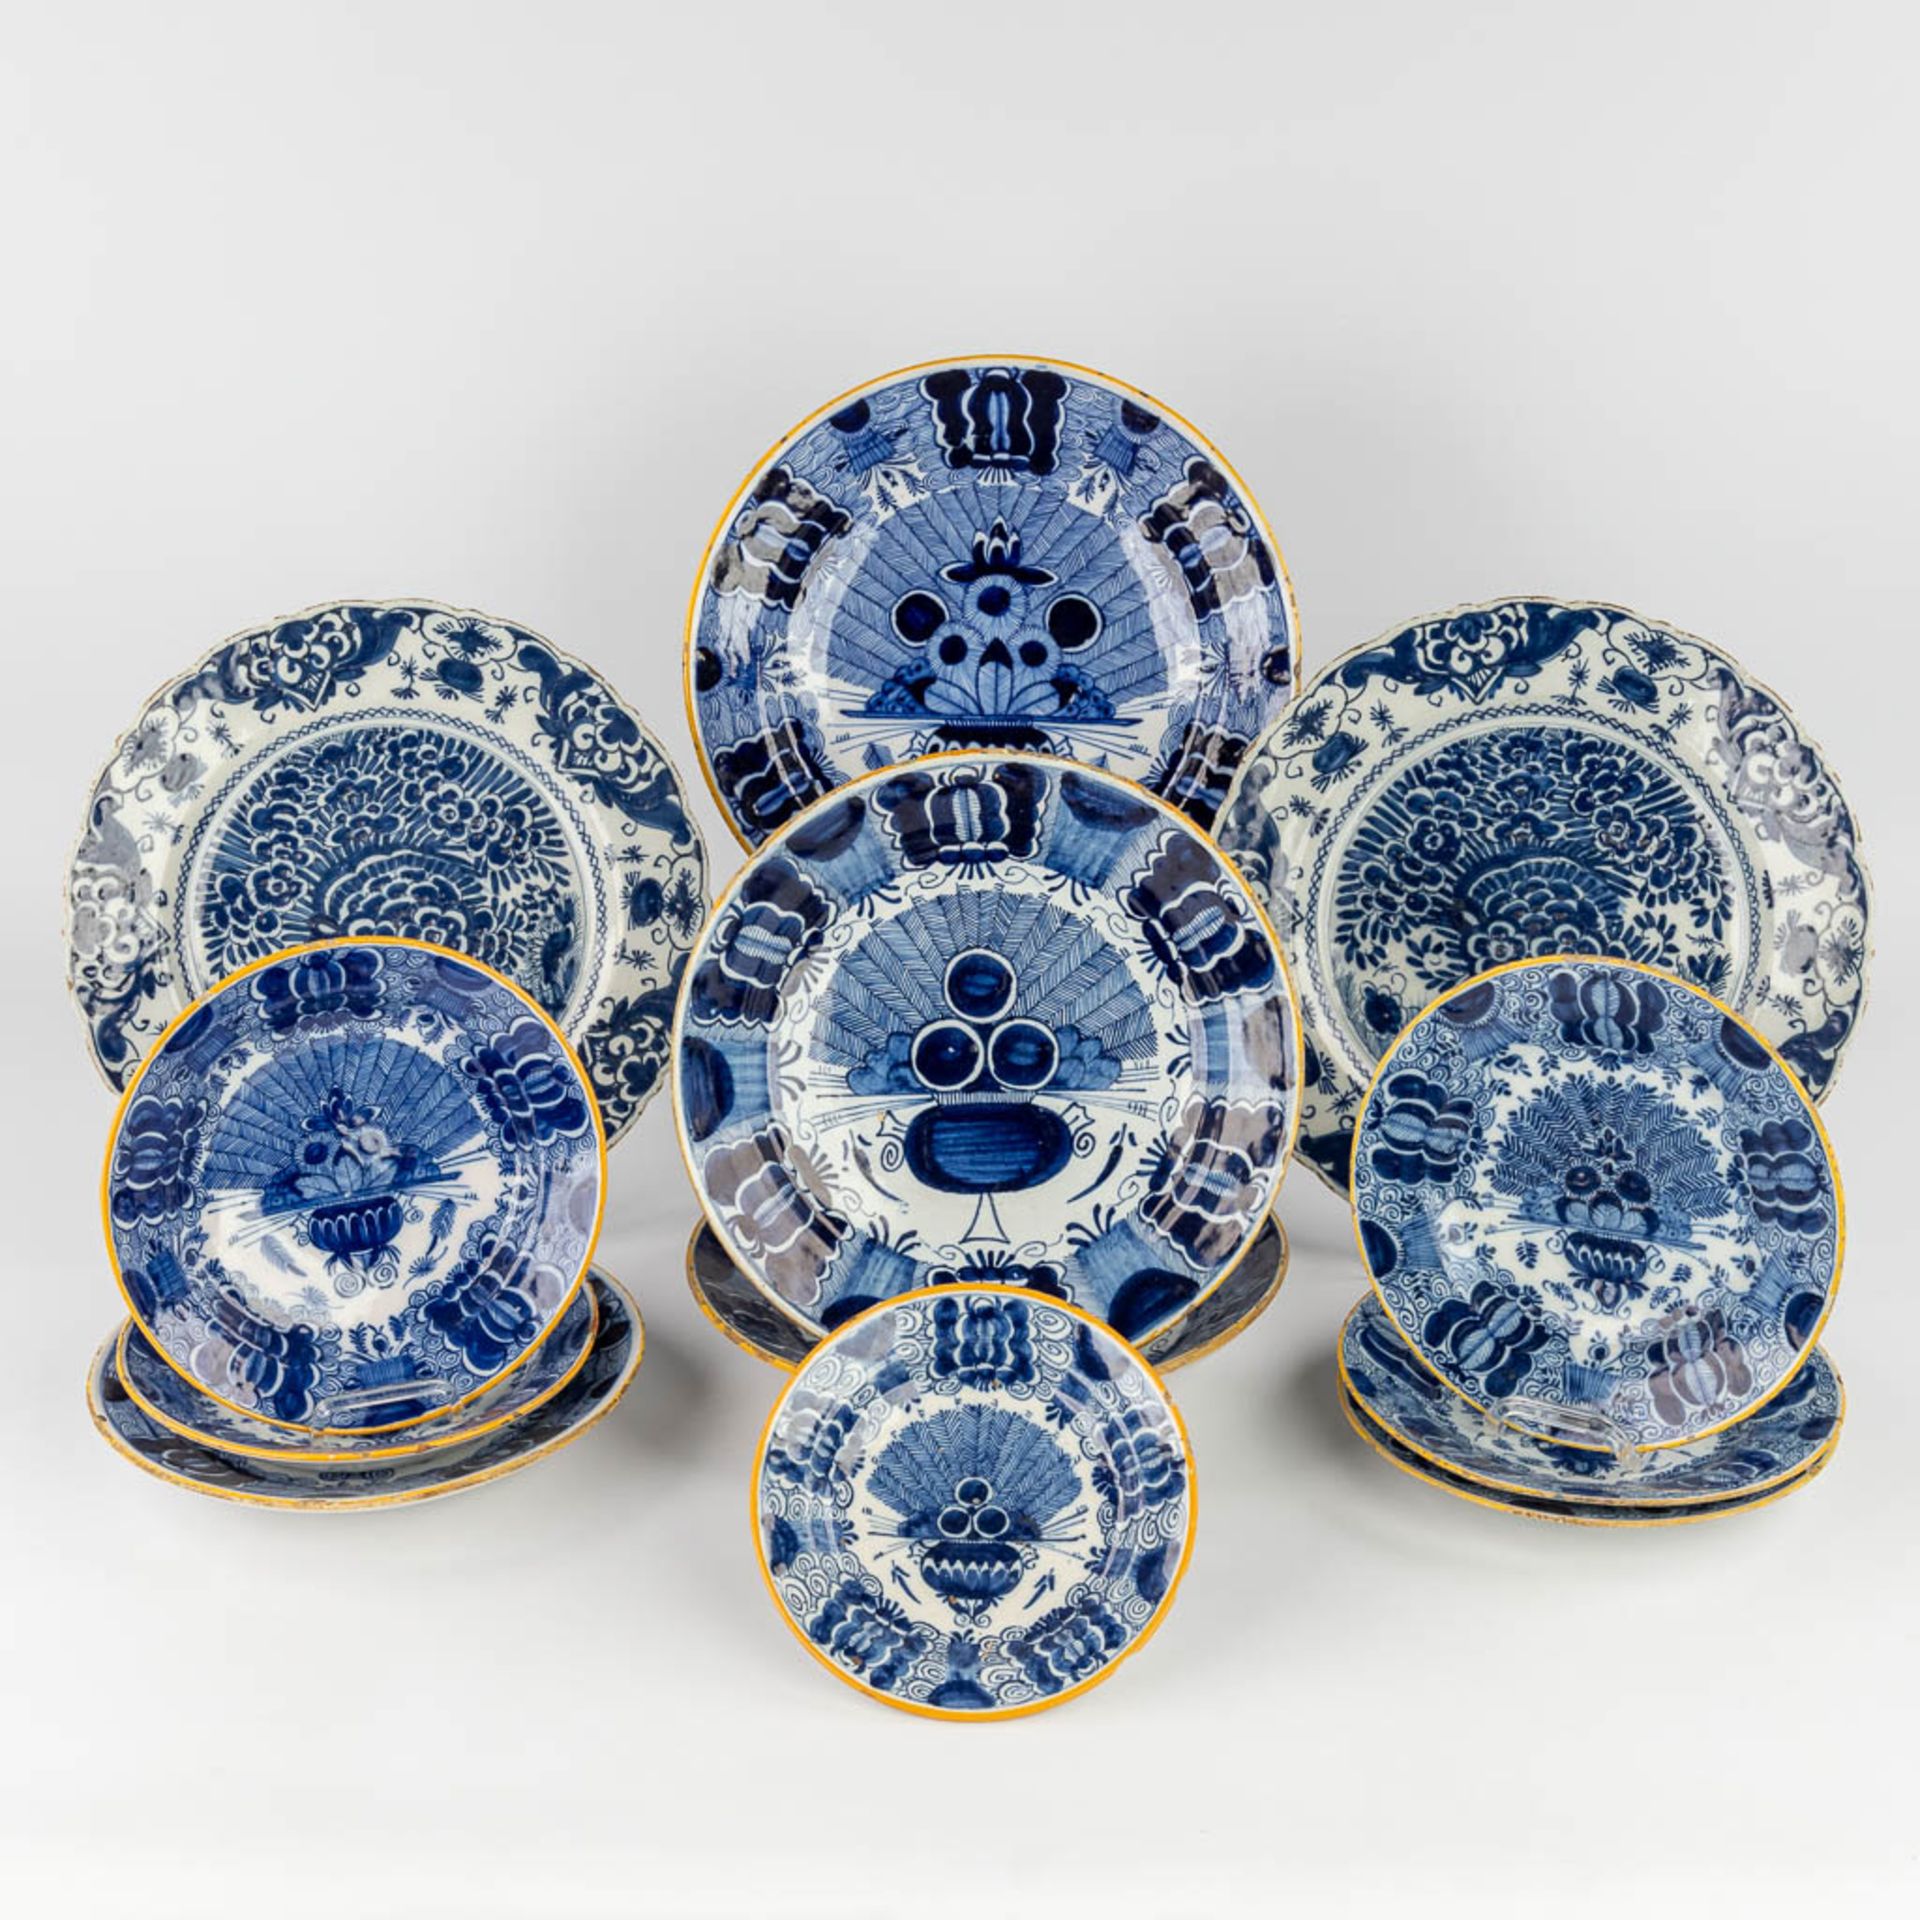 12 plates 'Peacock' or 'Pauwstaart', Delft, 18th C. (D:34,5 cm)